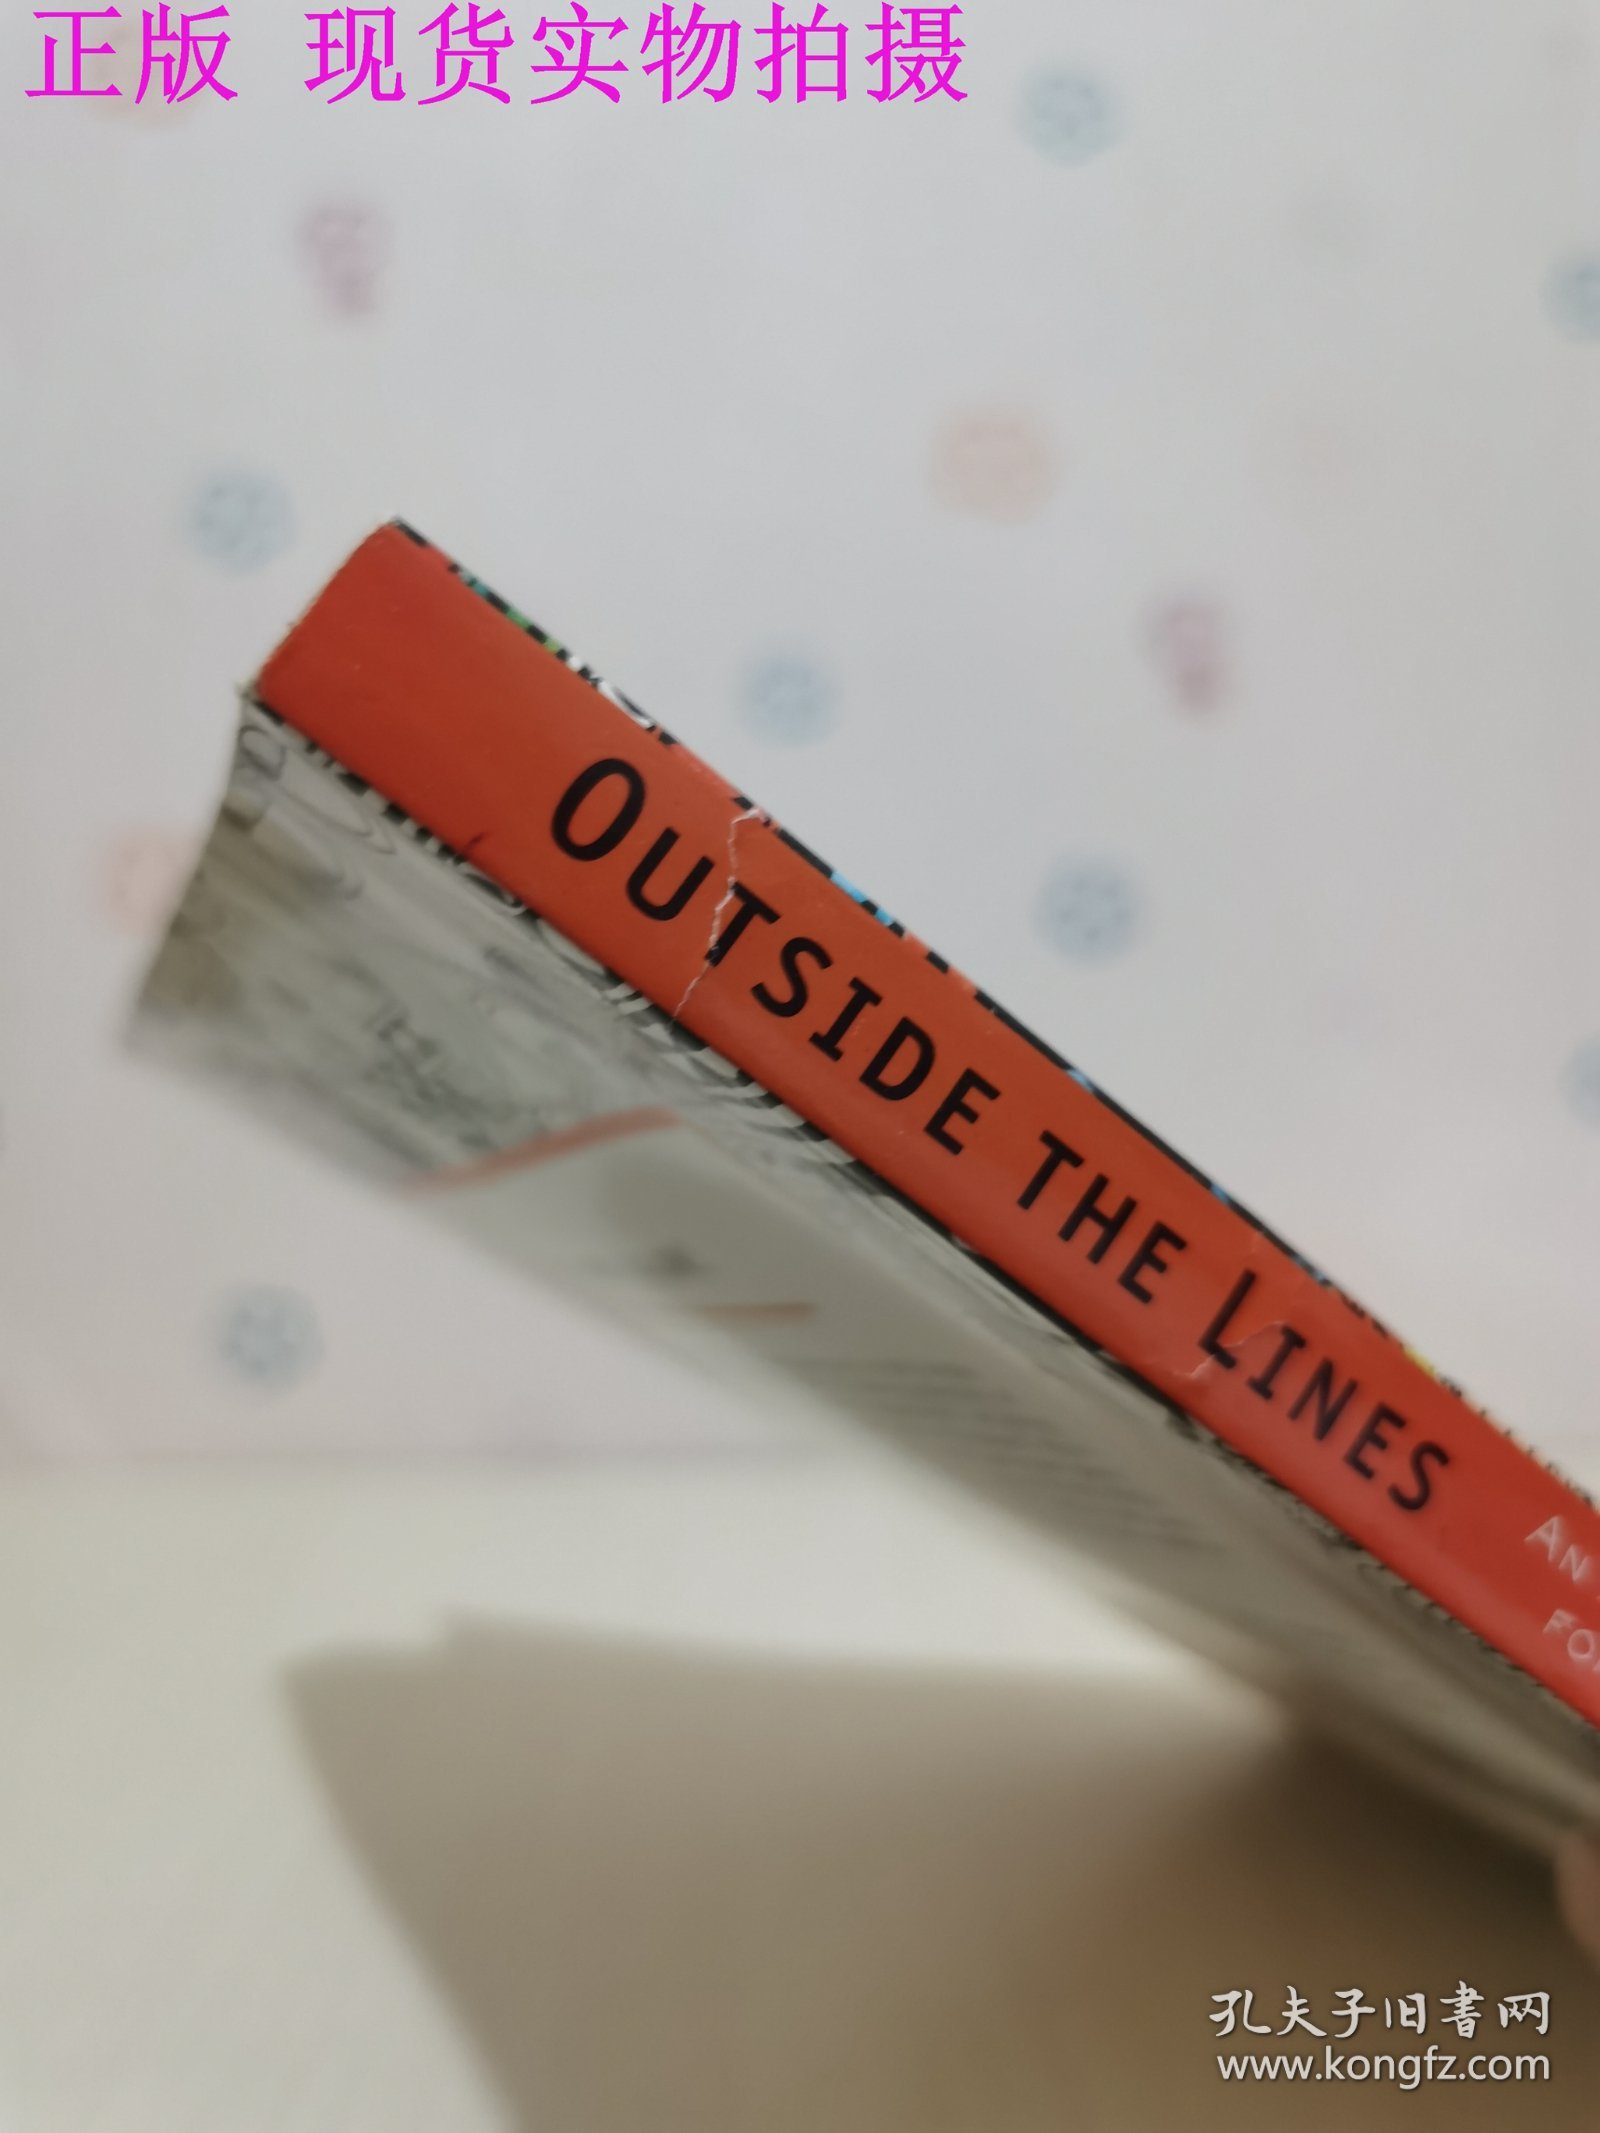 Outside the Lines: An Artists' Coloring Book for Giant Imaginations